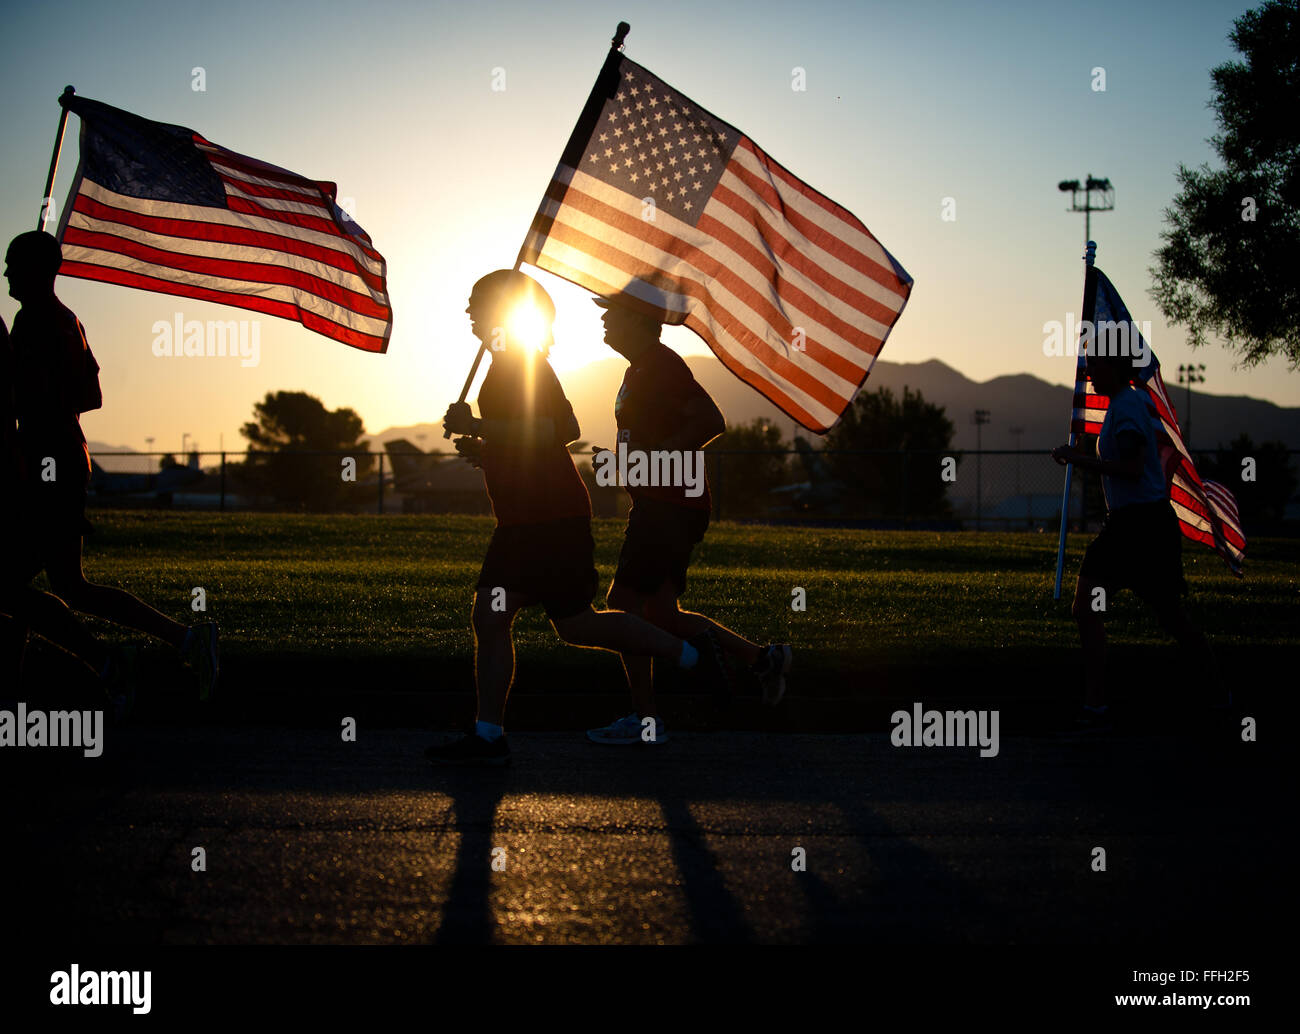 Members of Nellis Air Force Base run with the American flag Sept. 11, 2014, during the Old Glory Challenge at Nellis AFB, Nev. During the challenge, participants were charged with continuously running with the flag in 30-minute increments from 6:30 a.m. to 4:30 p.m. The goal of the event was to help participants remember the events of 9/11, honor those lost in defending freedom and tell the story of all who serve in defense of freedom. Stock Photo